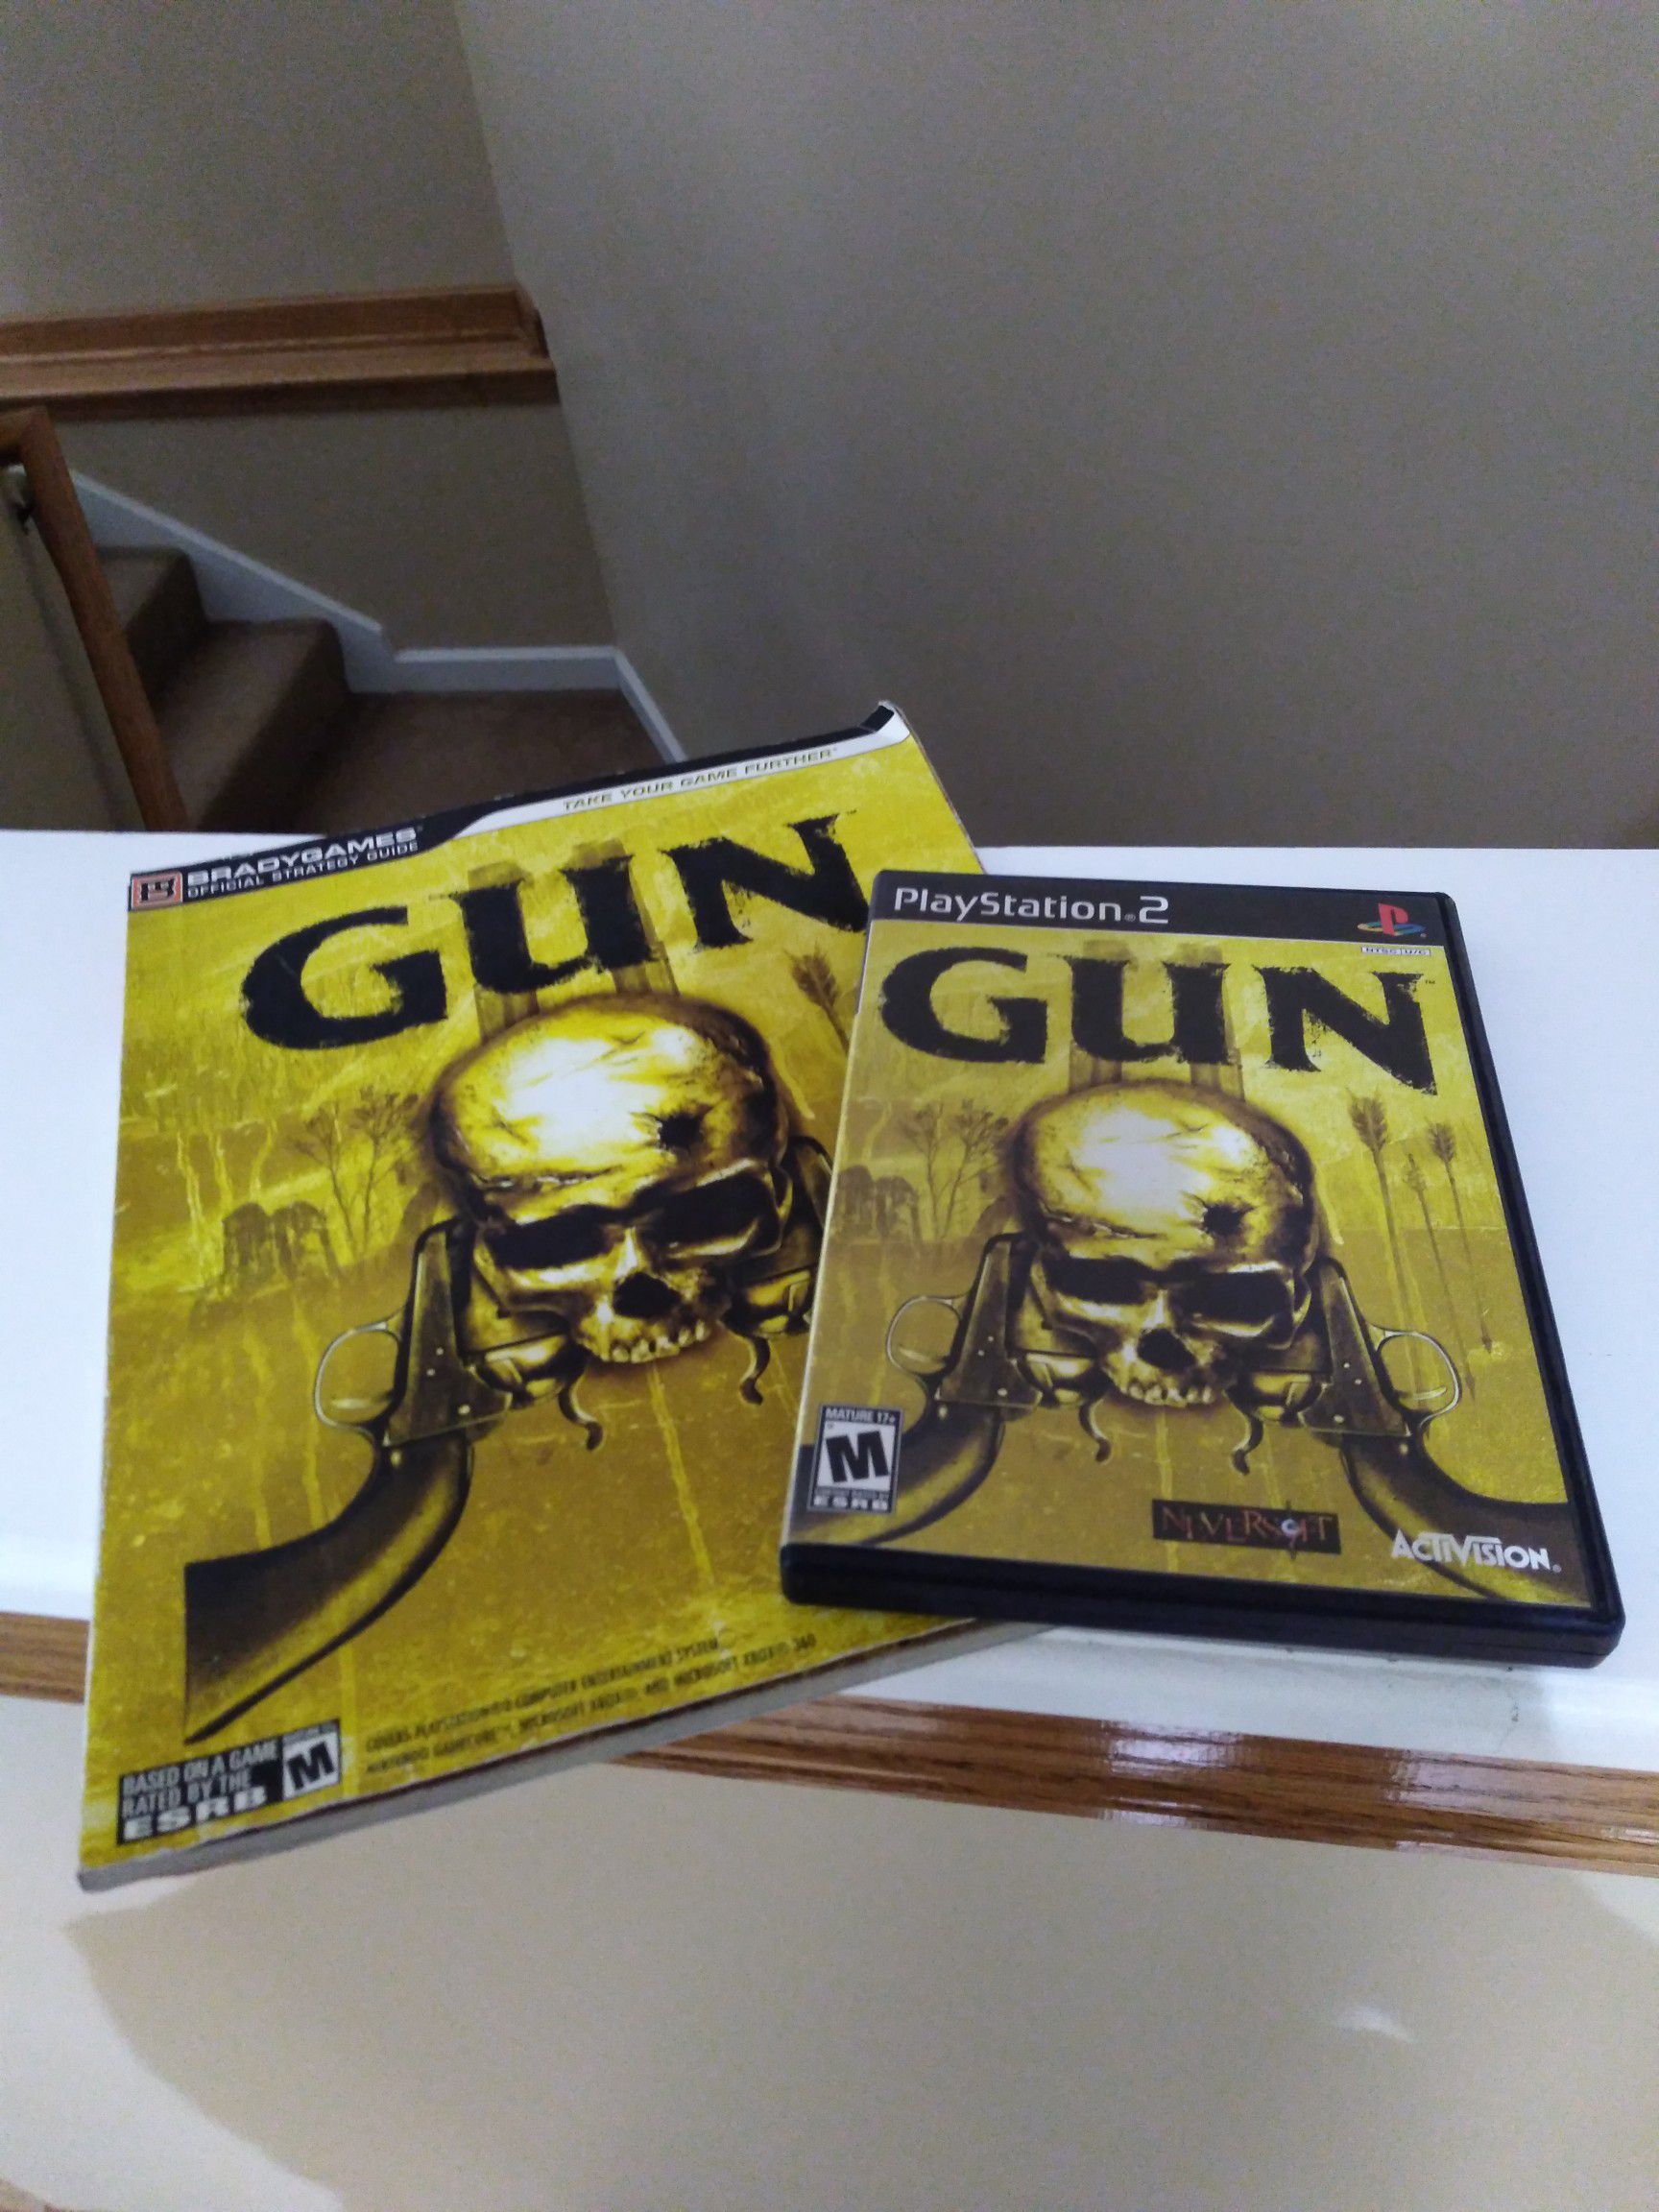 Ps2 Gun game with game guide